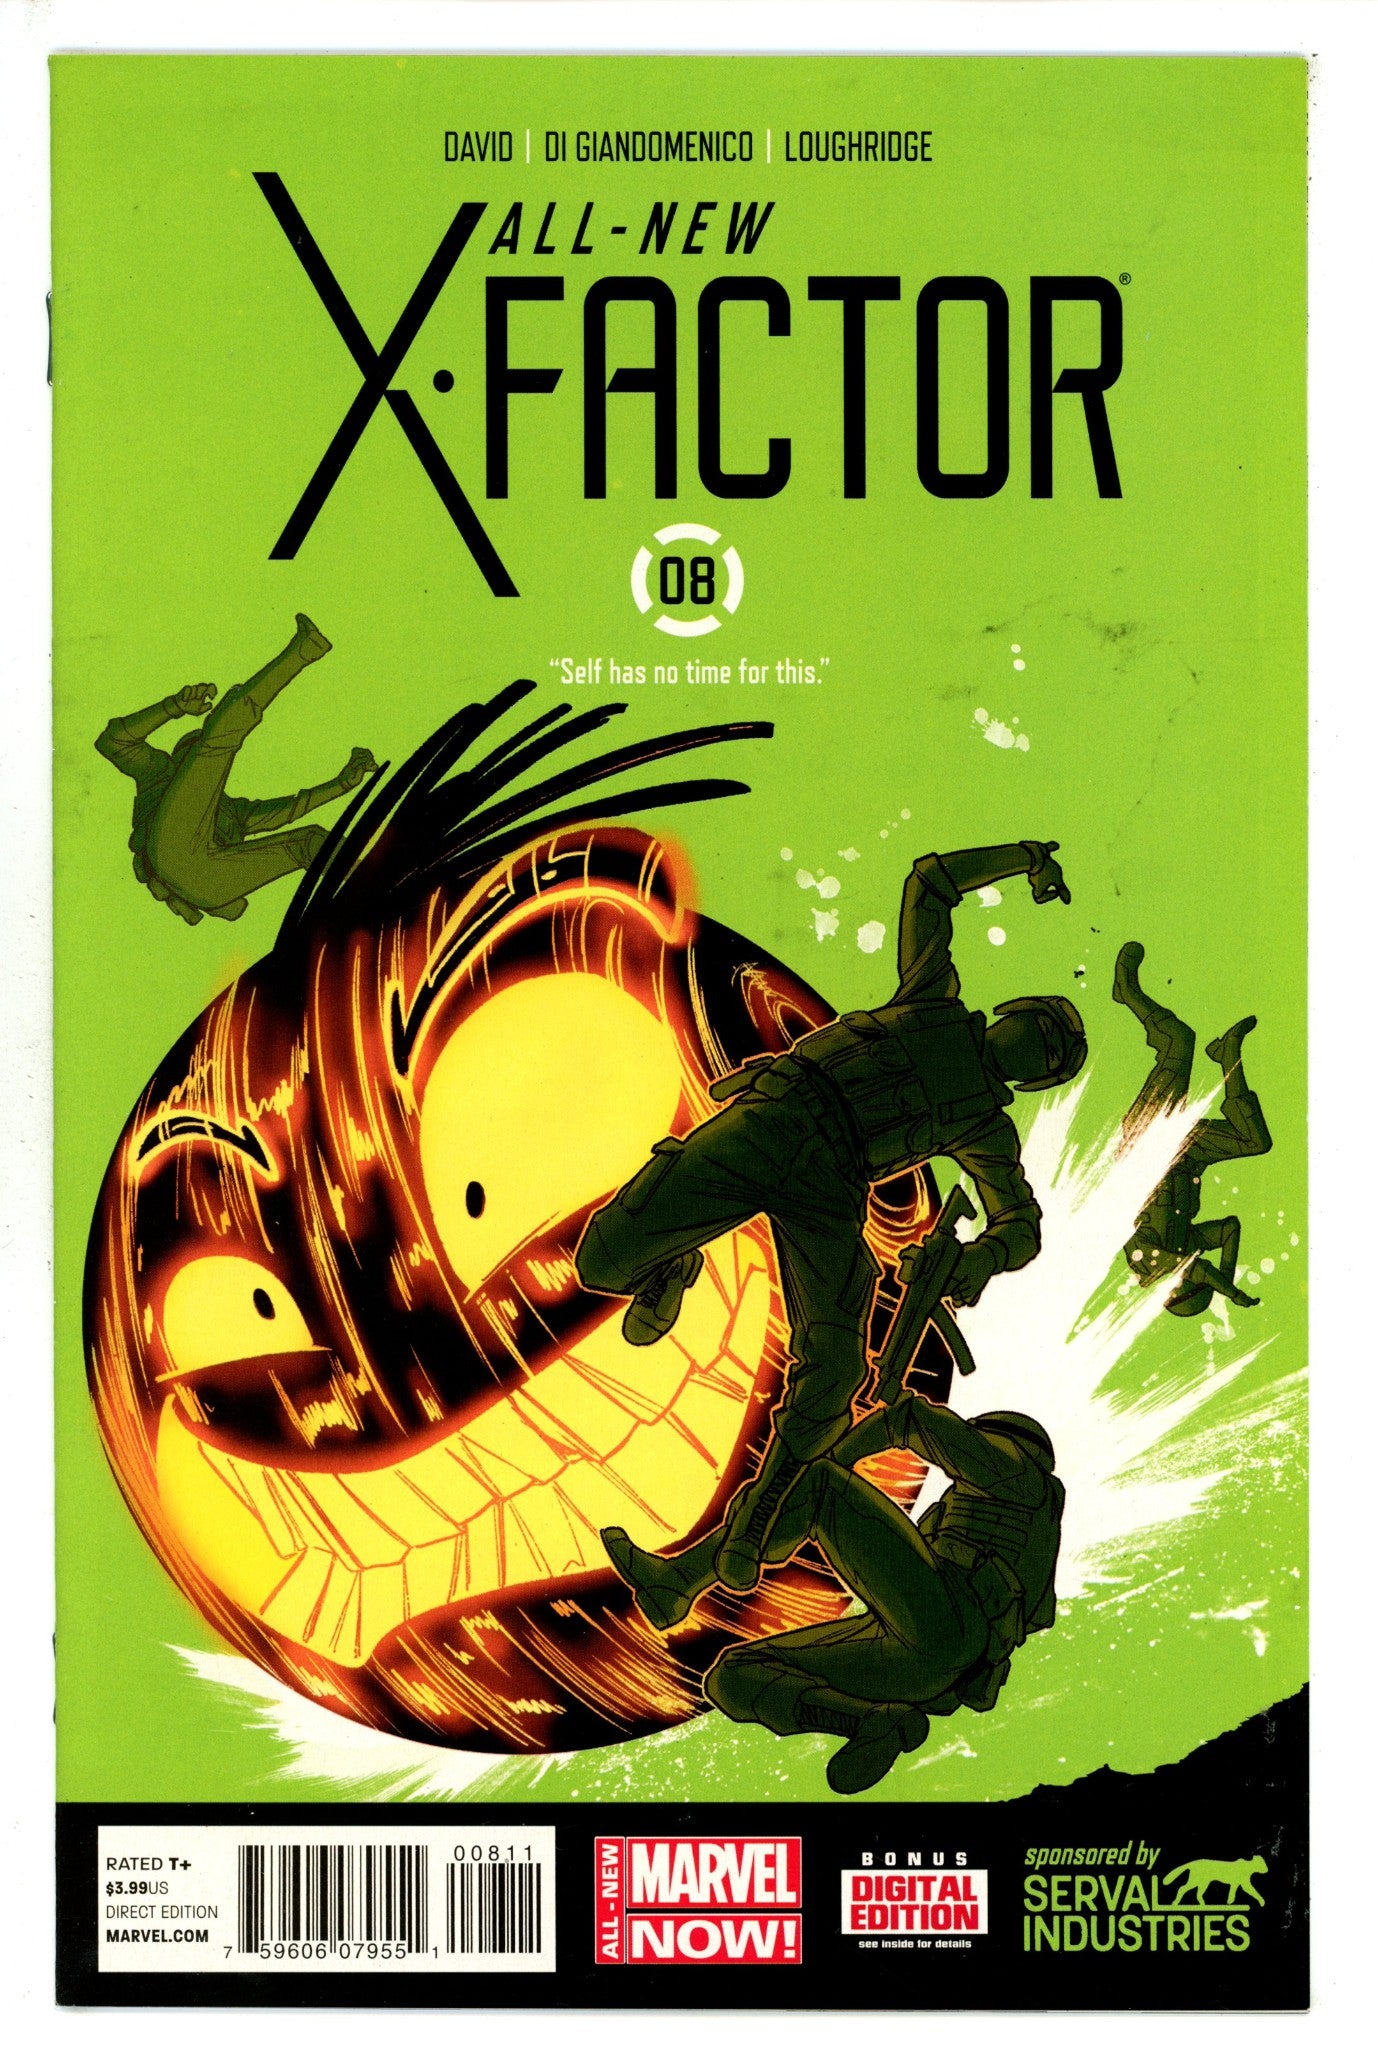 All-New X-Factor 8 (2014)